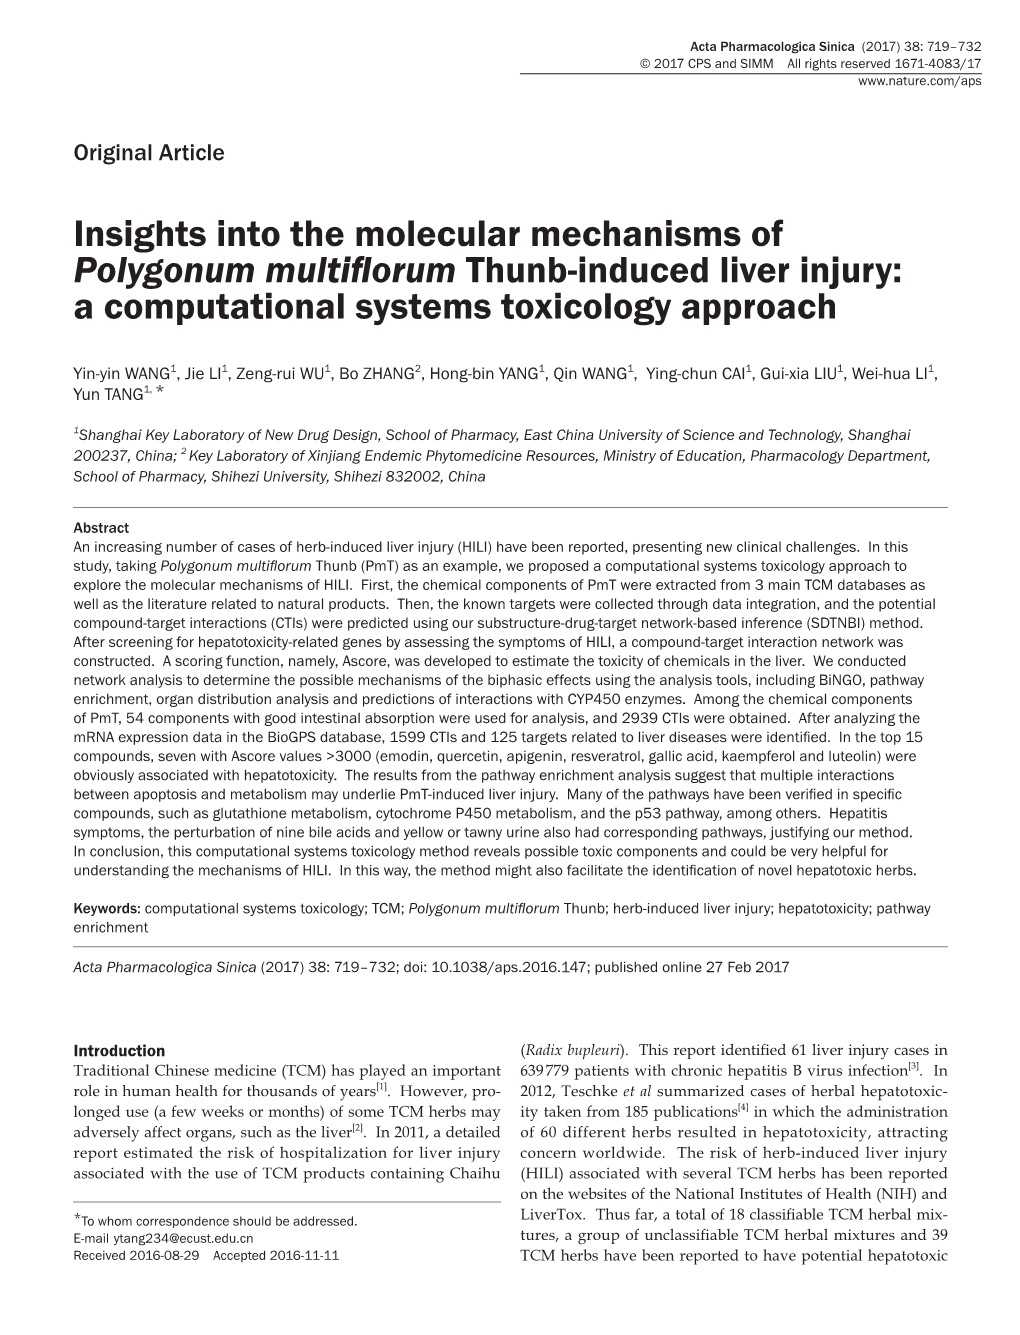 Insights Into the Molecular Mechanisms of Polygonum Multiflorum Thunb-Induced Liver Injury: a Computational Systems Toxicology Approach